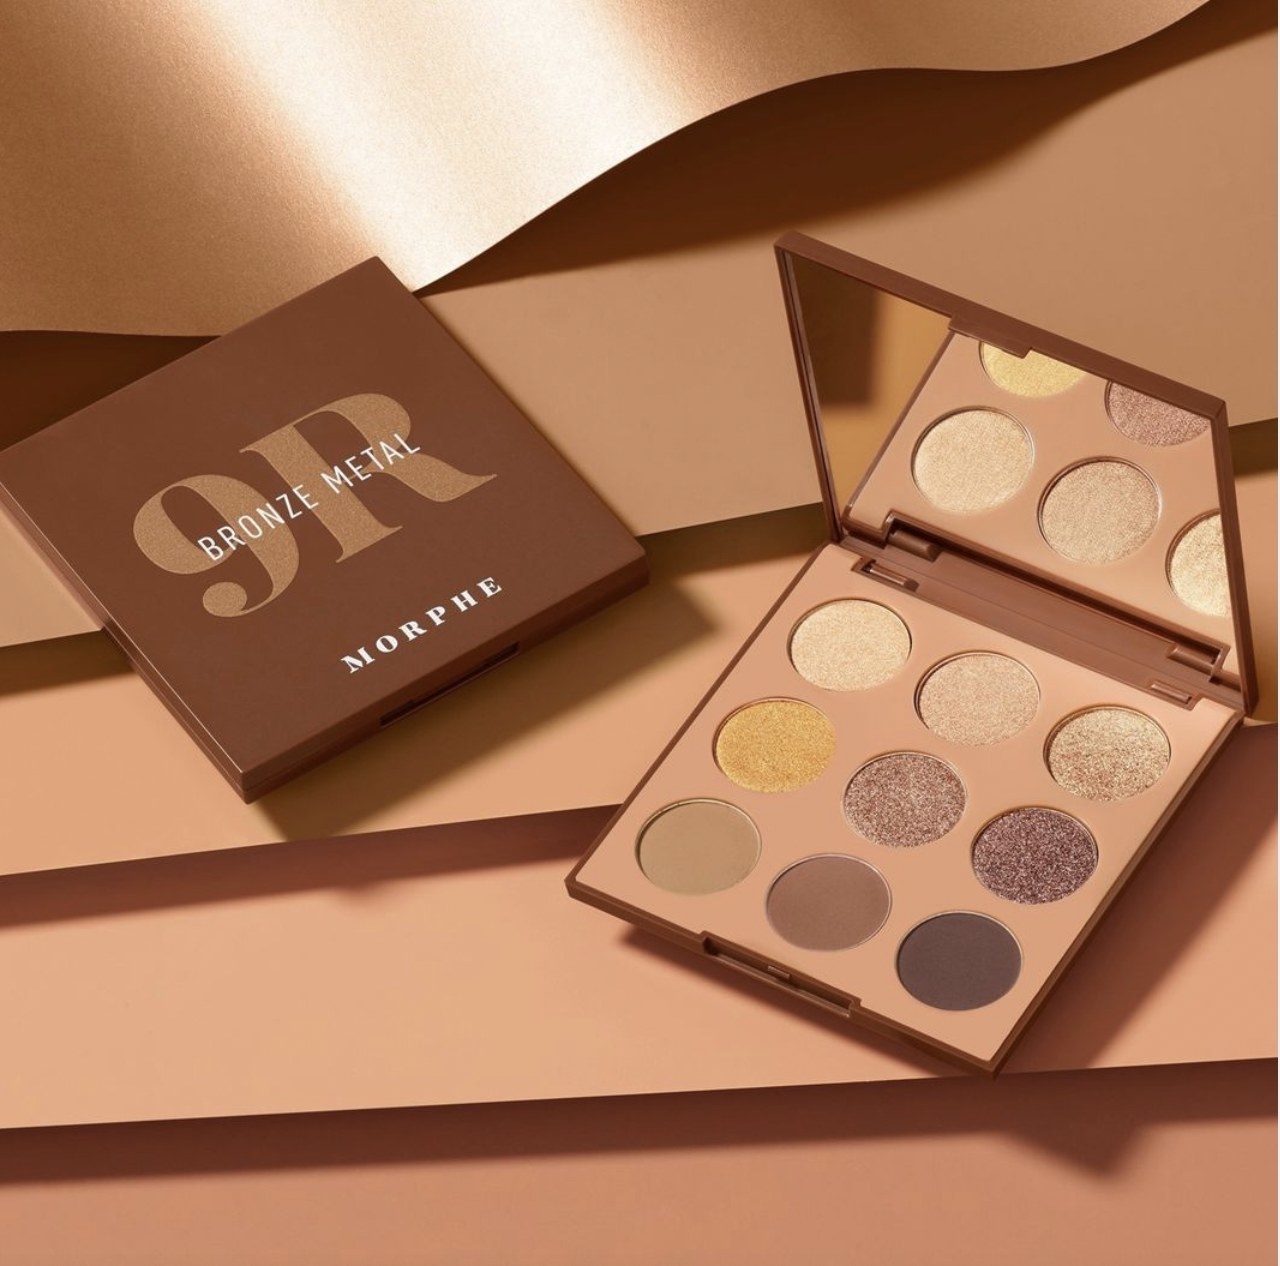 An eyeshadow palette with gold, brown, and copper shades